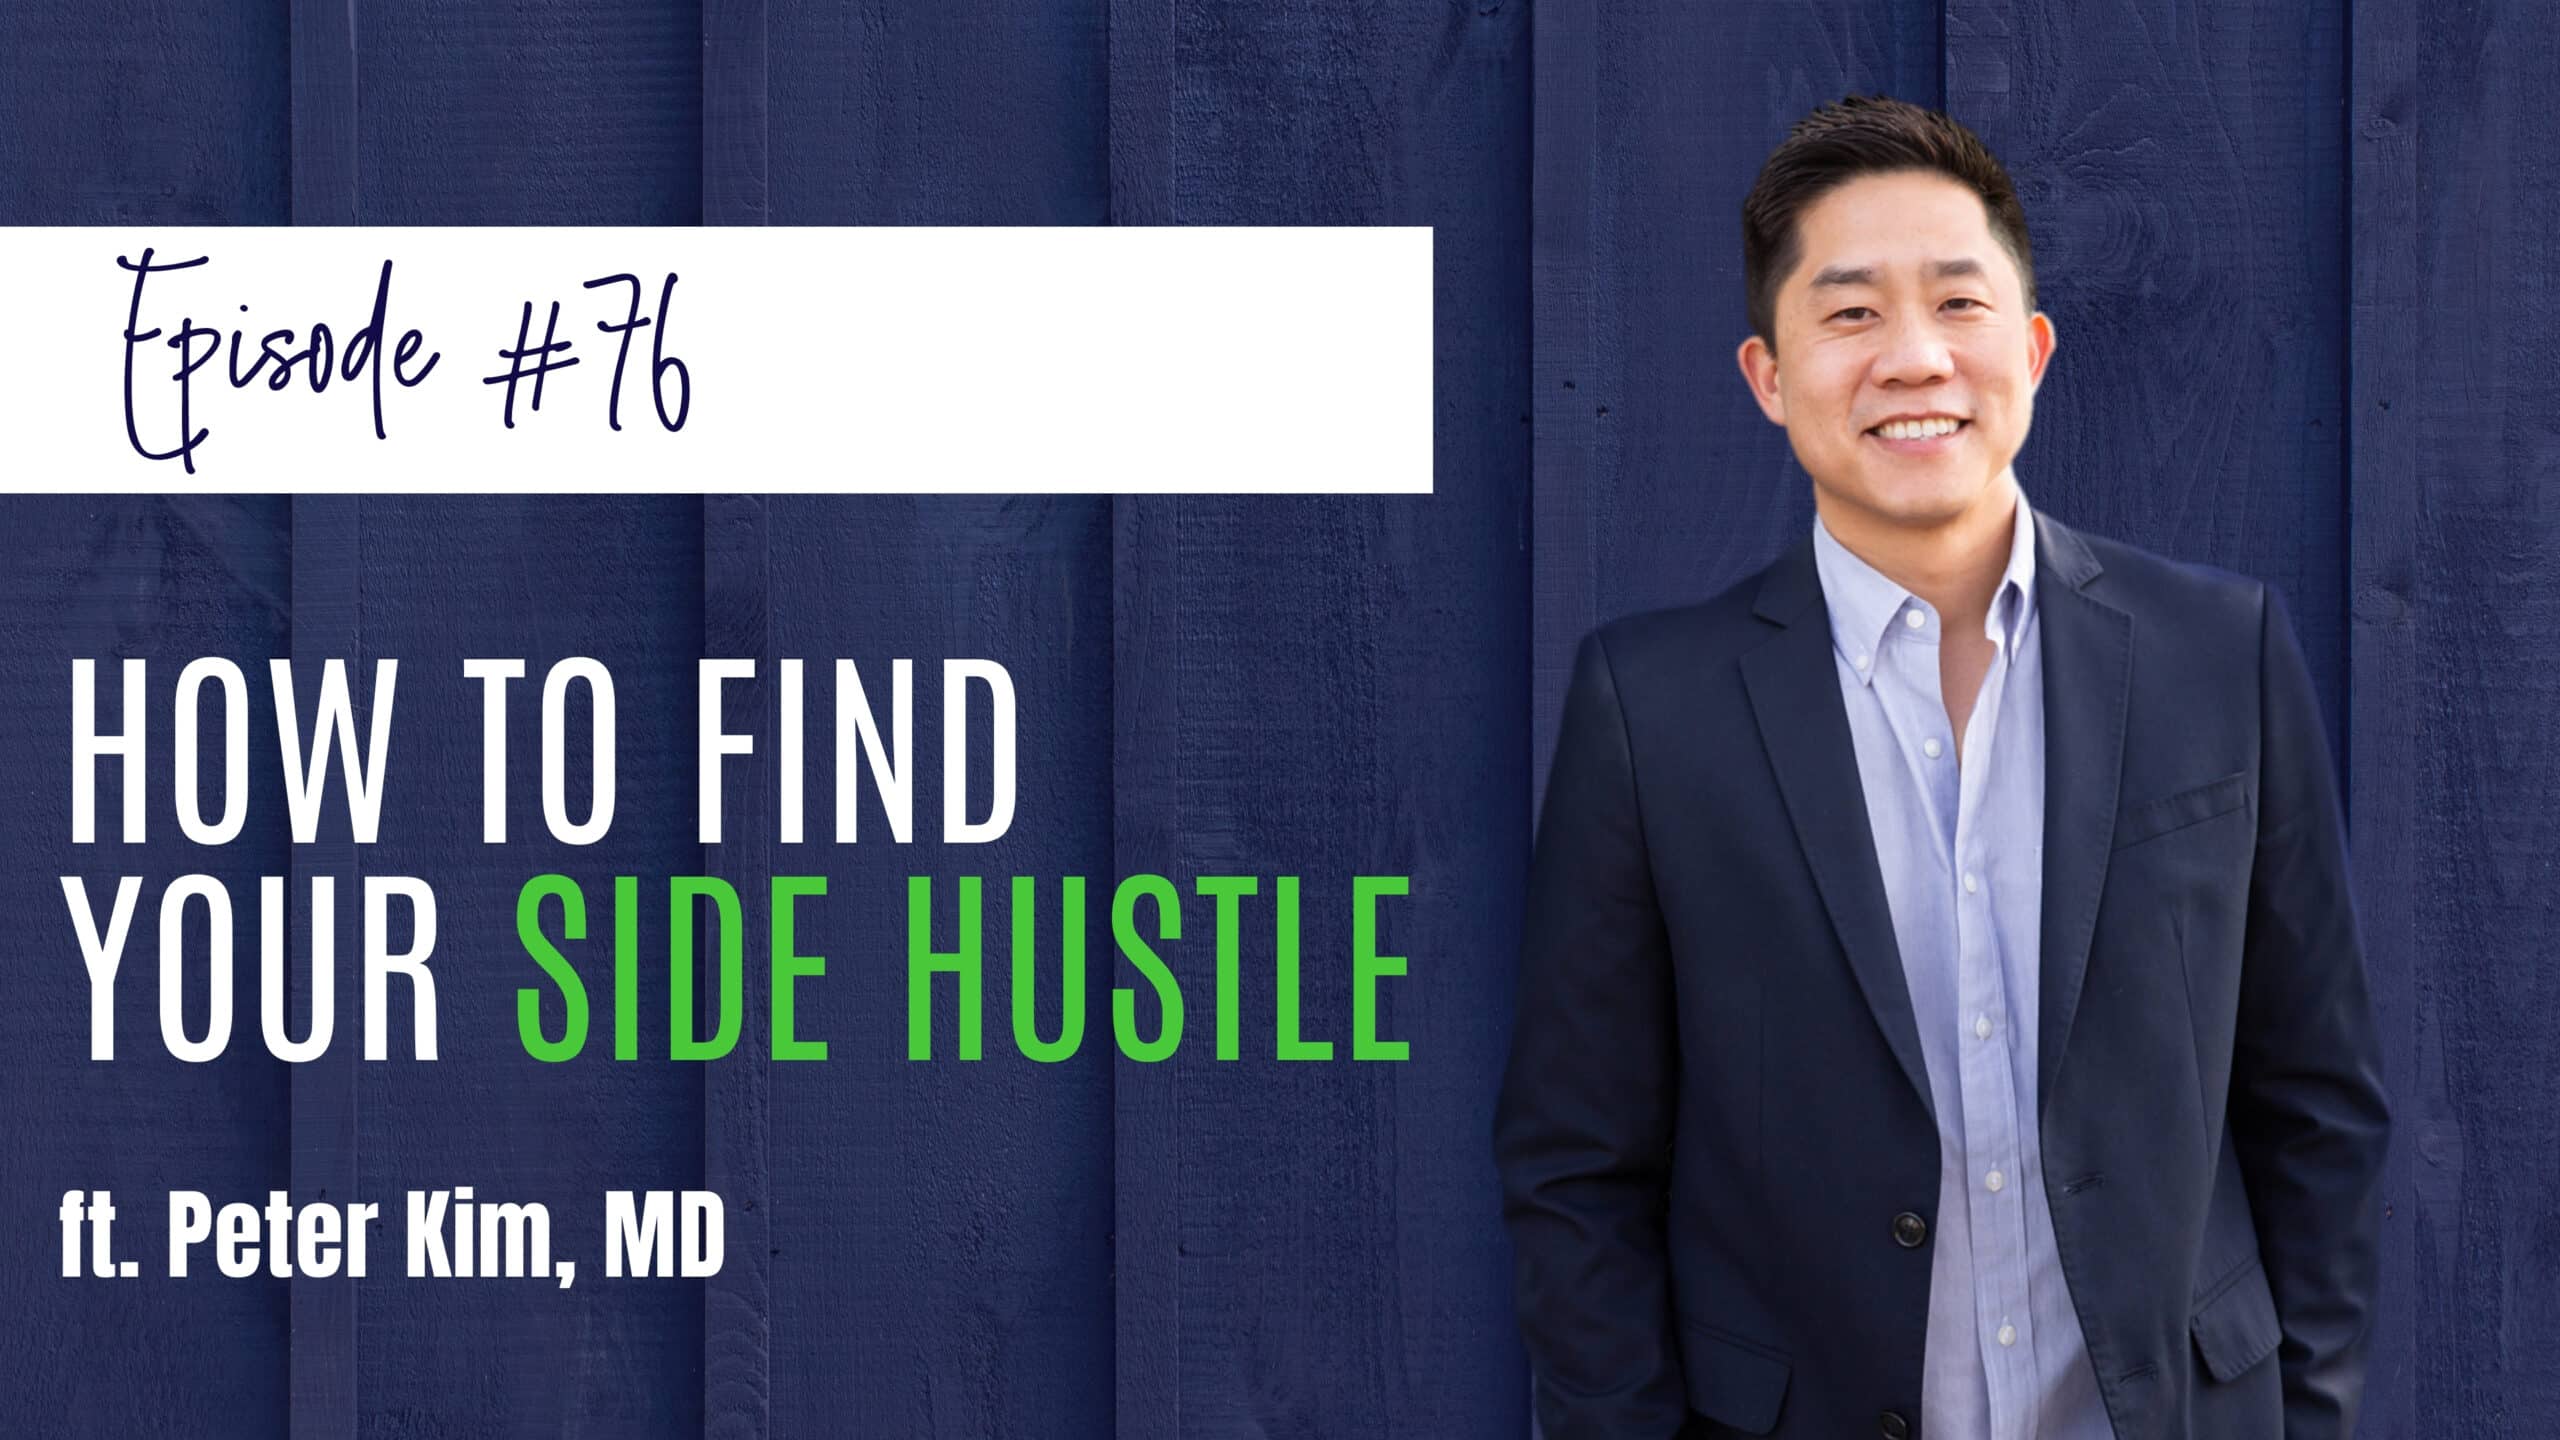 How to find your side hustle